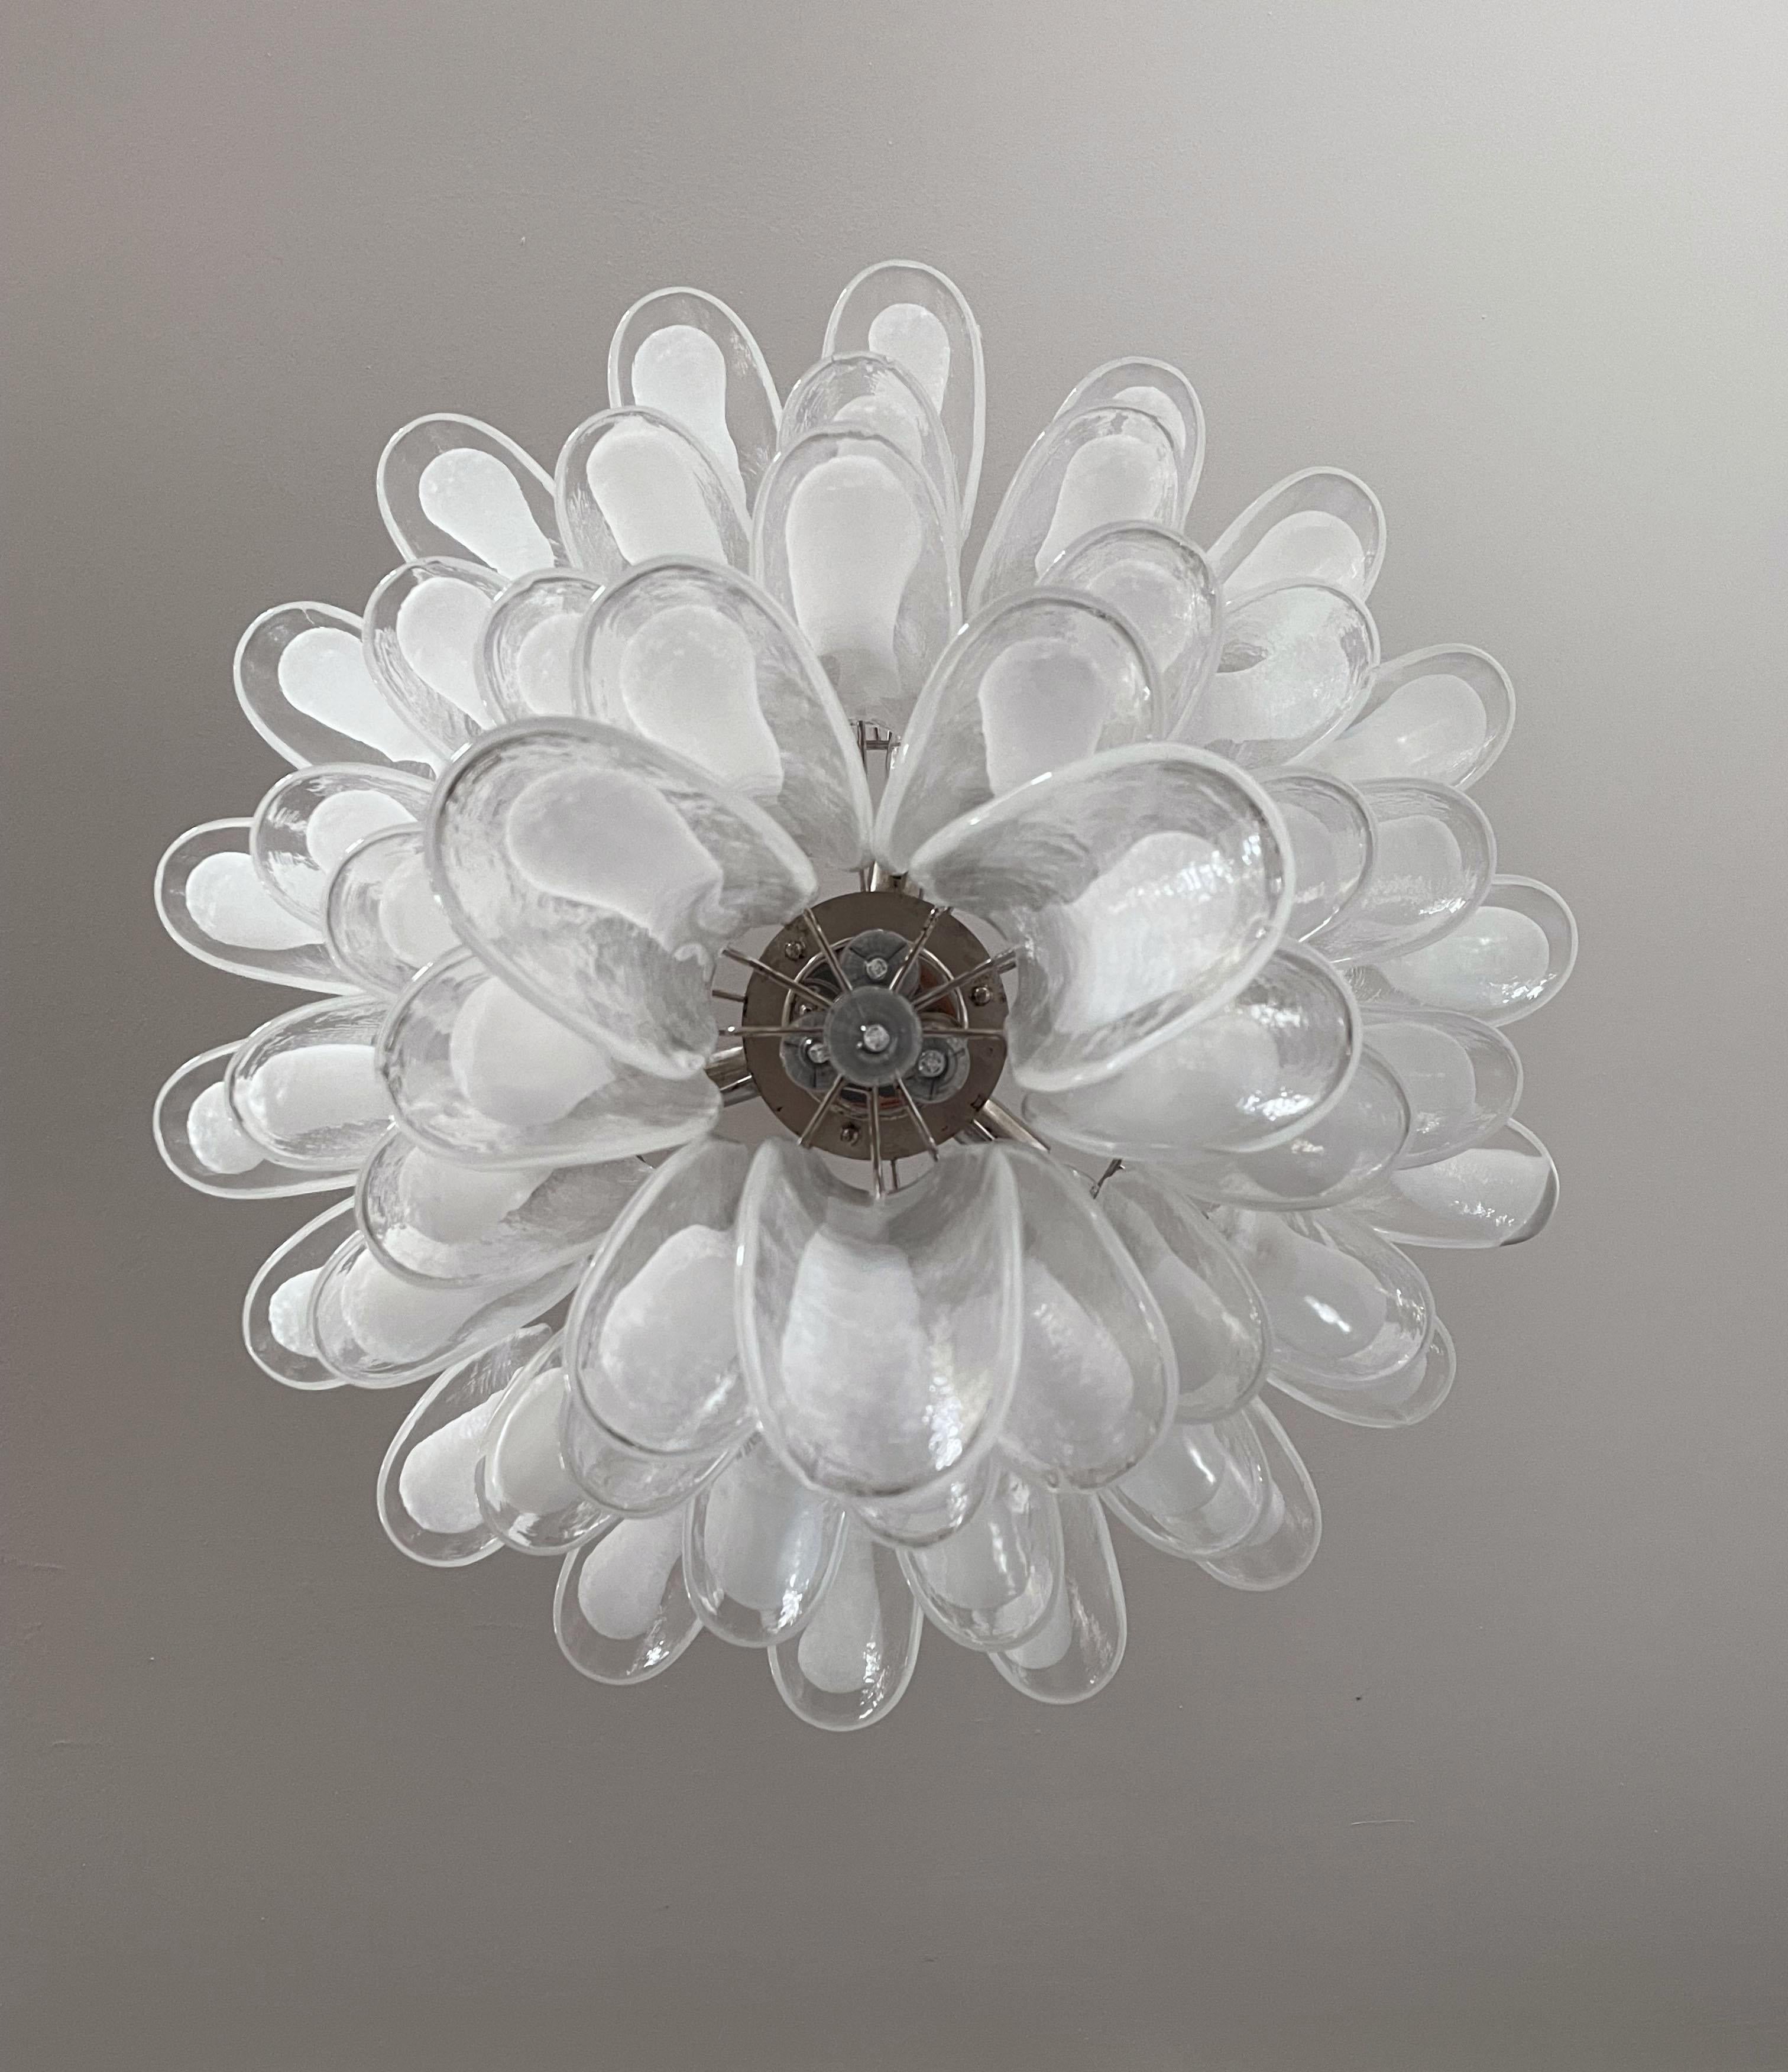 Italian vintage Murano chandelier in the manner of Mazzega - 52 glass petals For Sale 2